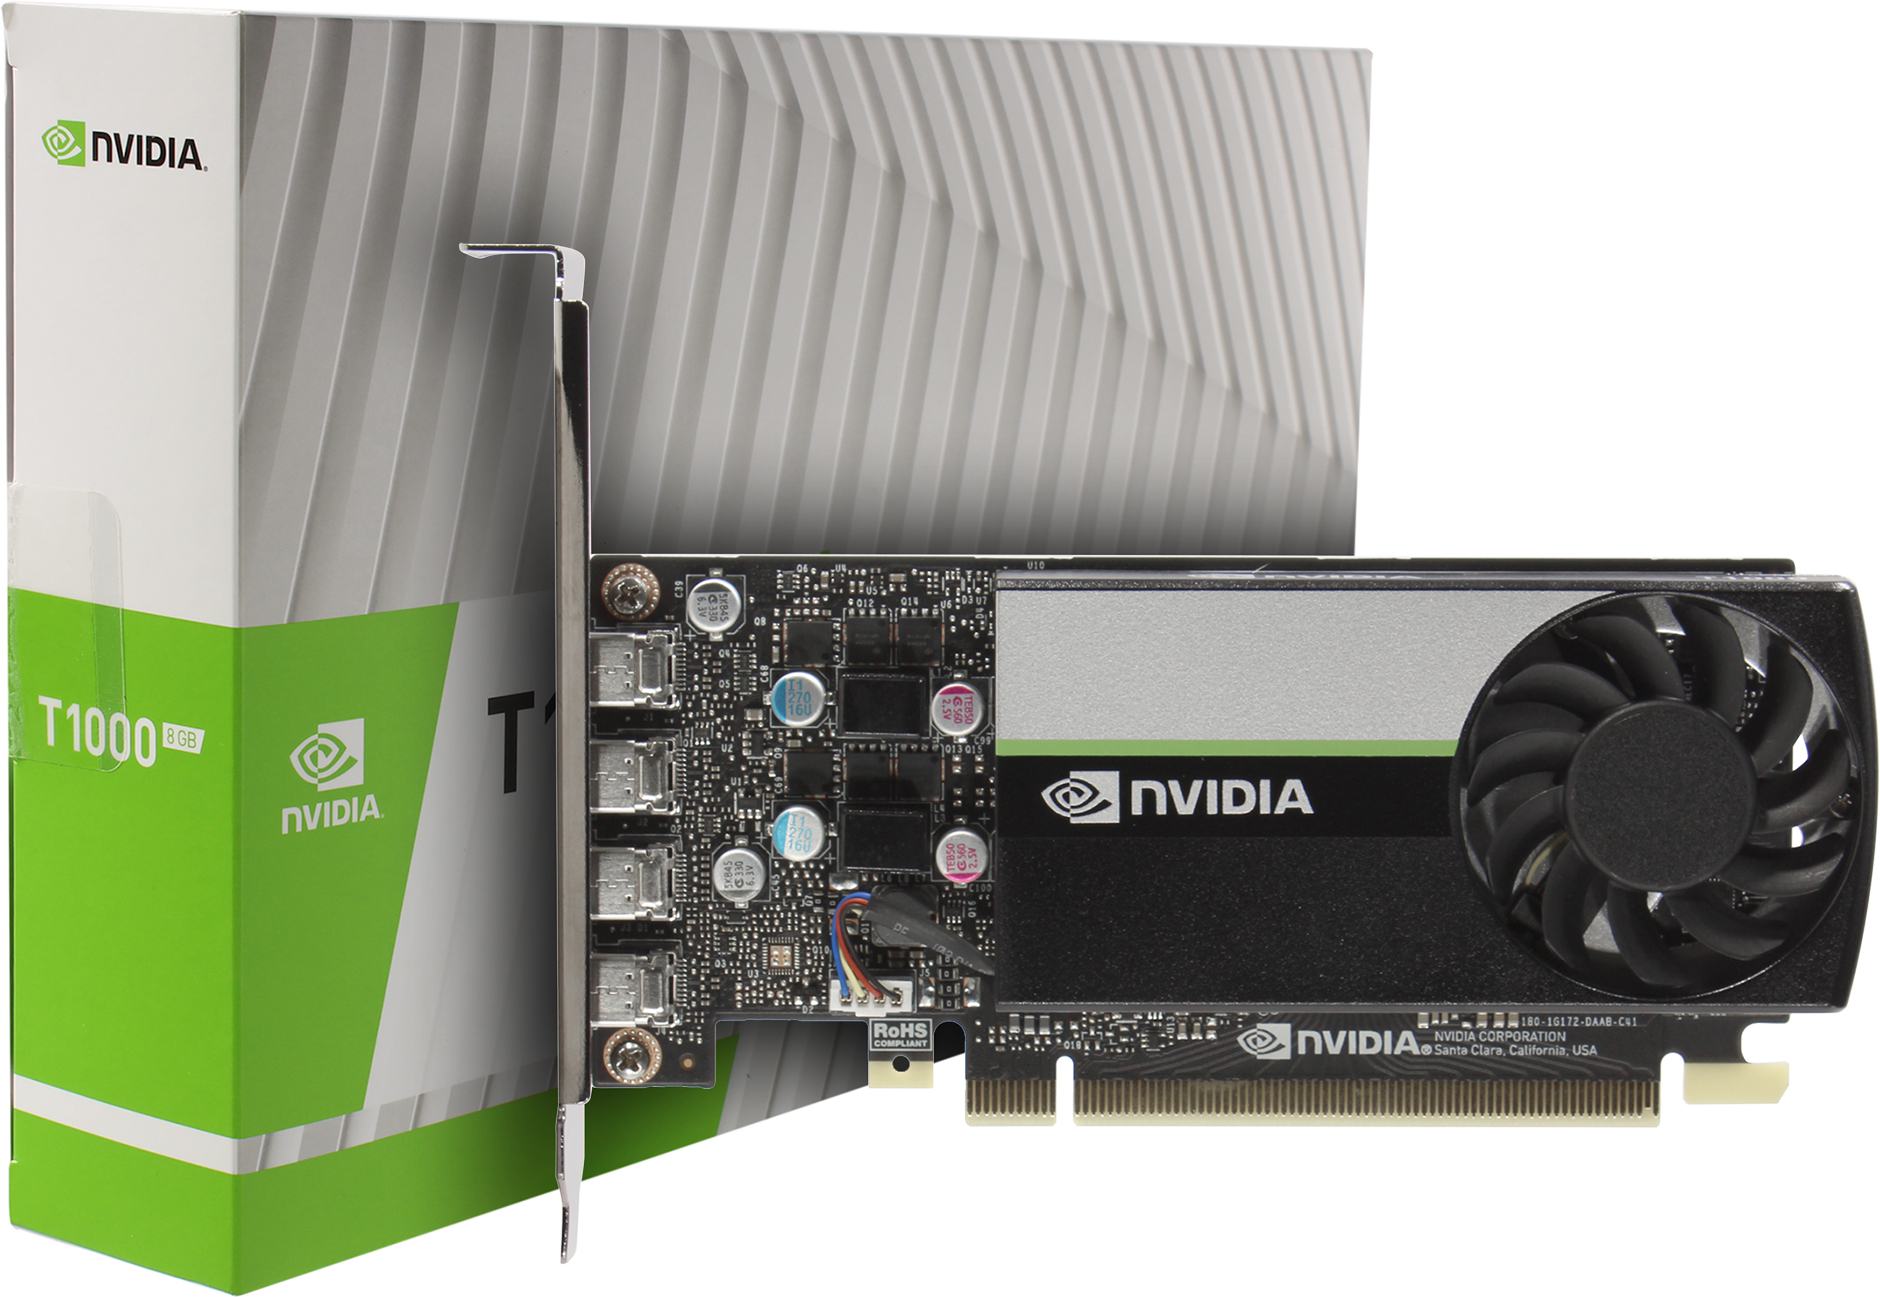 Get More Pleasure out of Your Multimedia with the Nvidia Quadro T1000